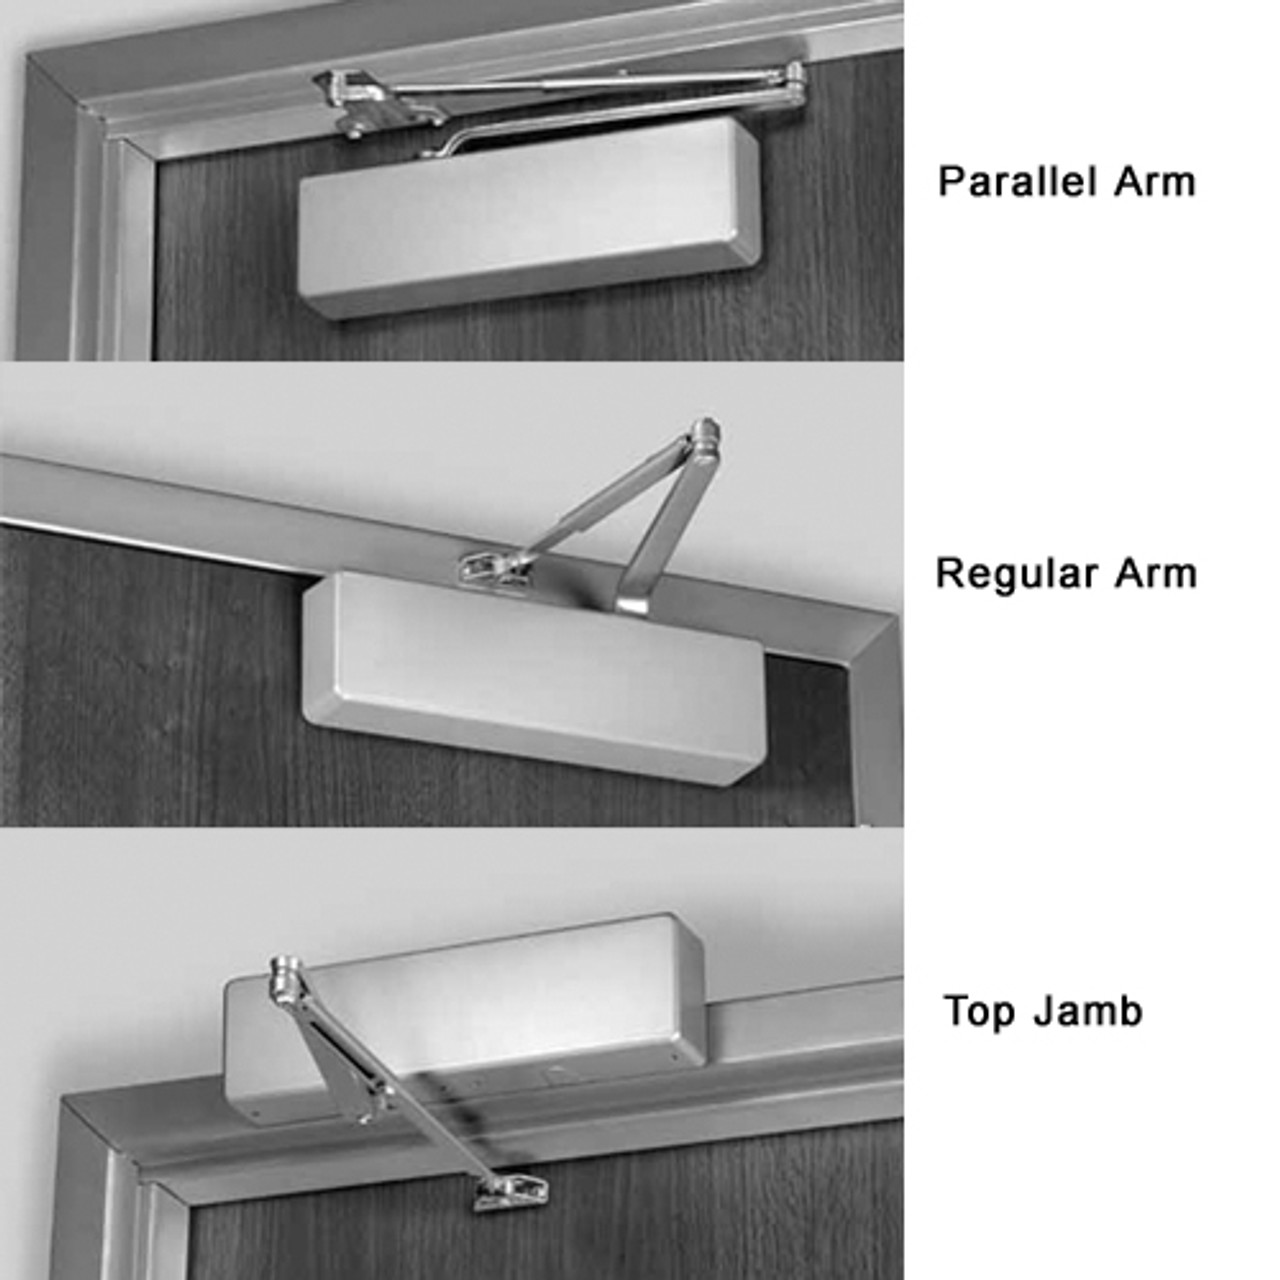 7500-690 Norton 7500 Series Non-Hold Open Institutional Door Closer with Regular Parallel or Top Jamb to 3 inch Reveal in Statuary Bronze